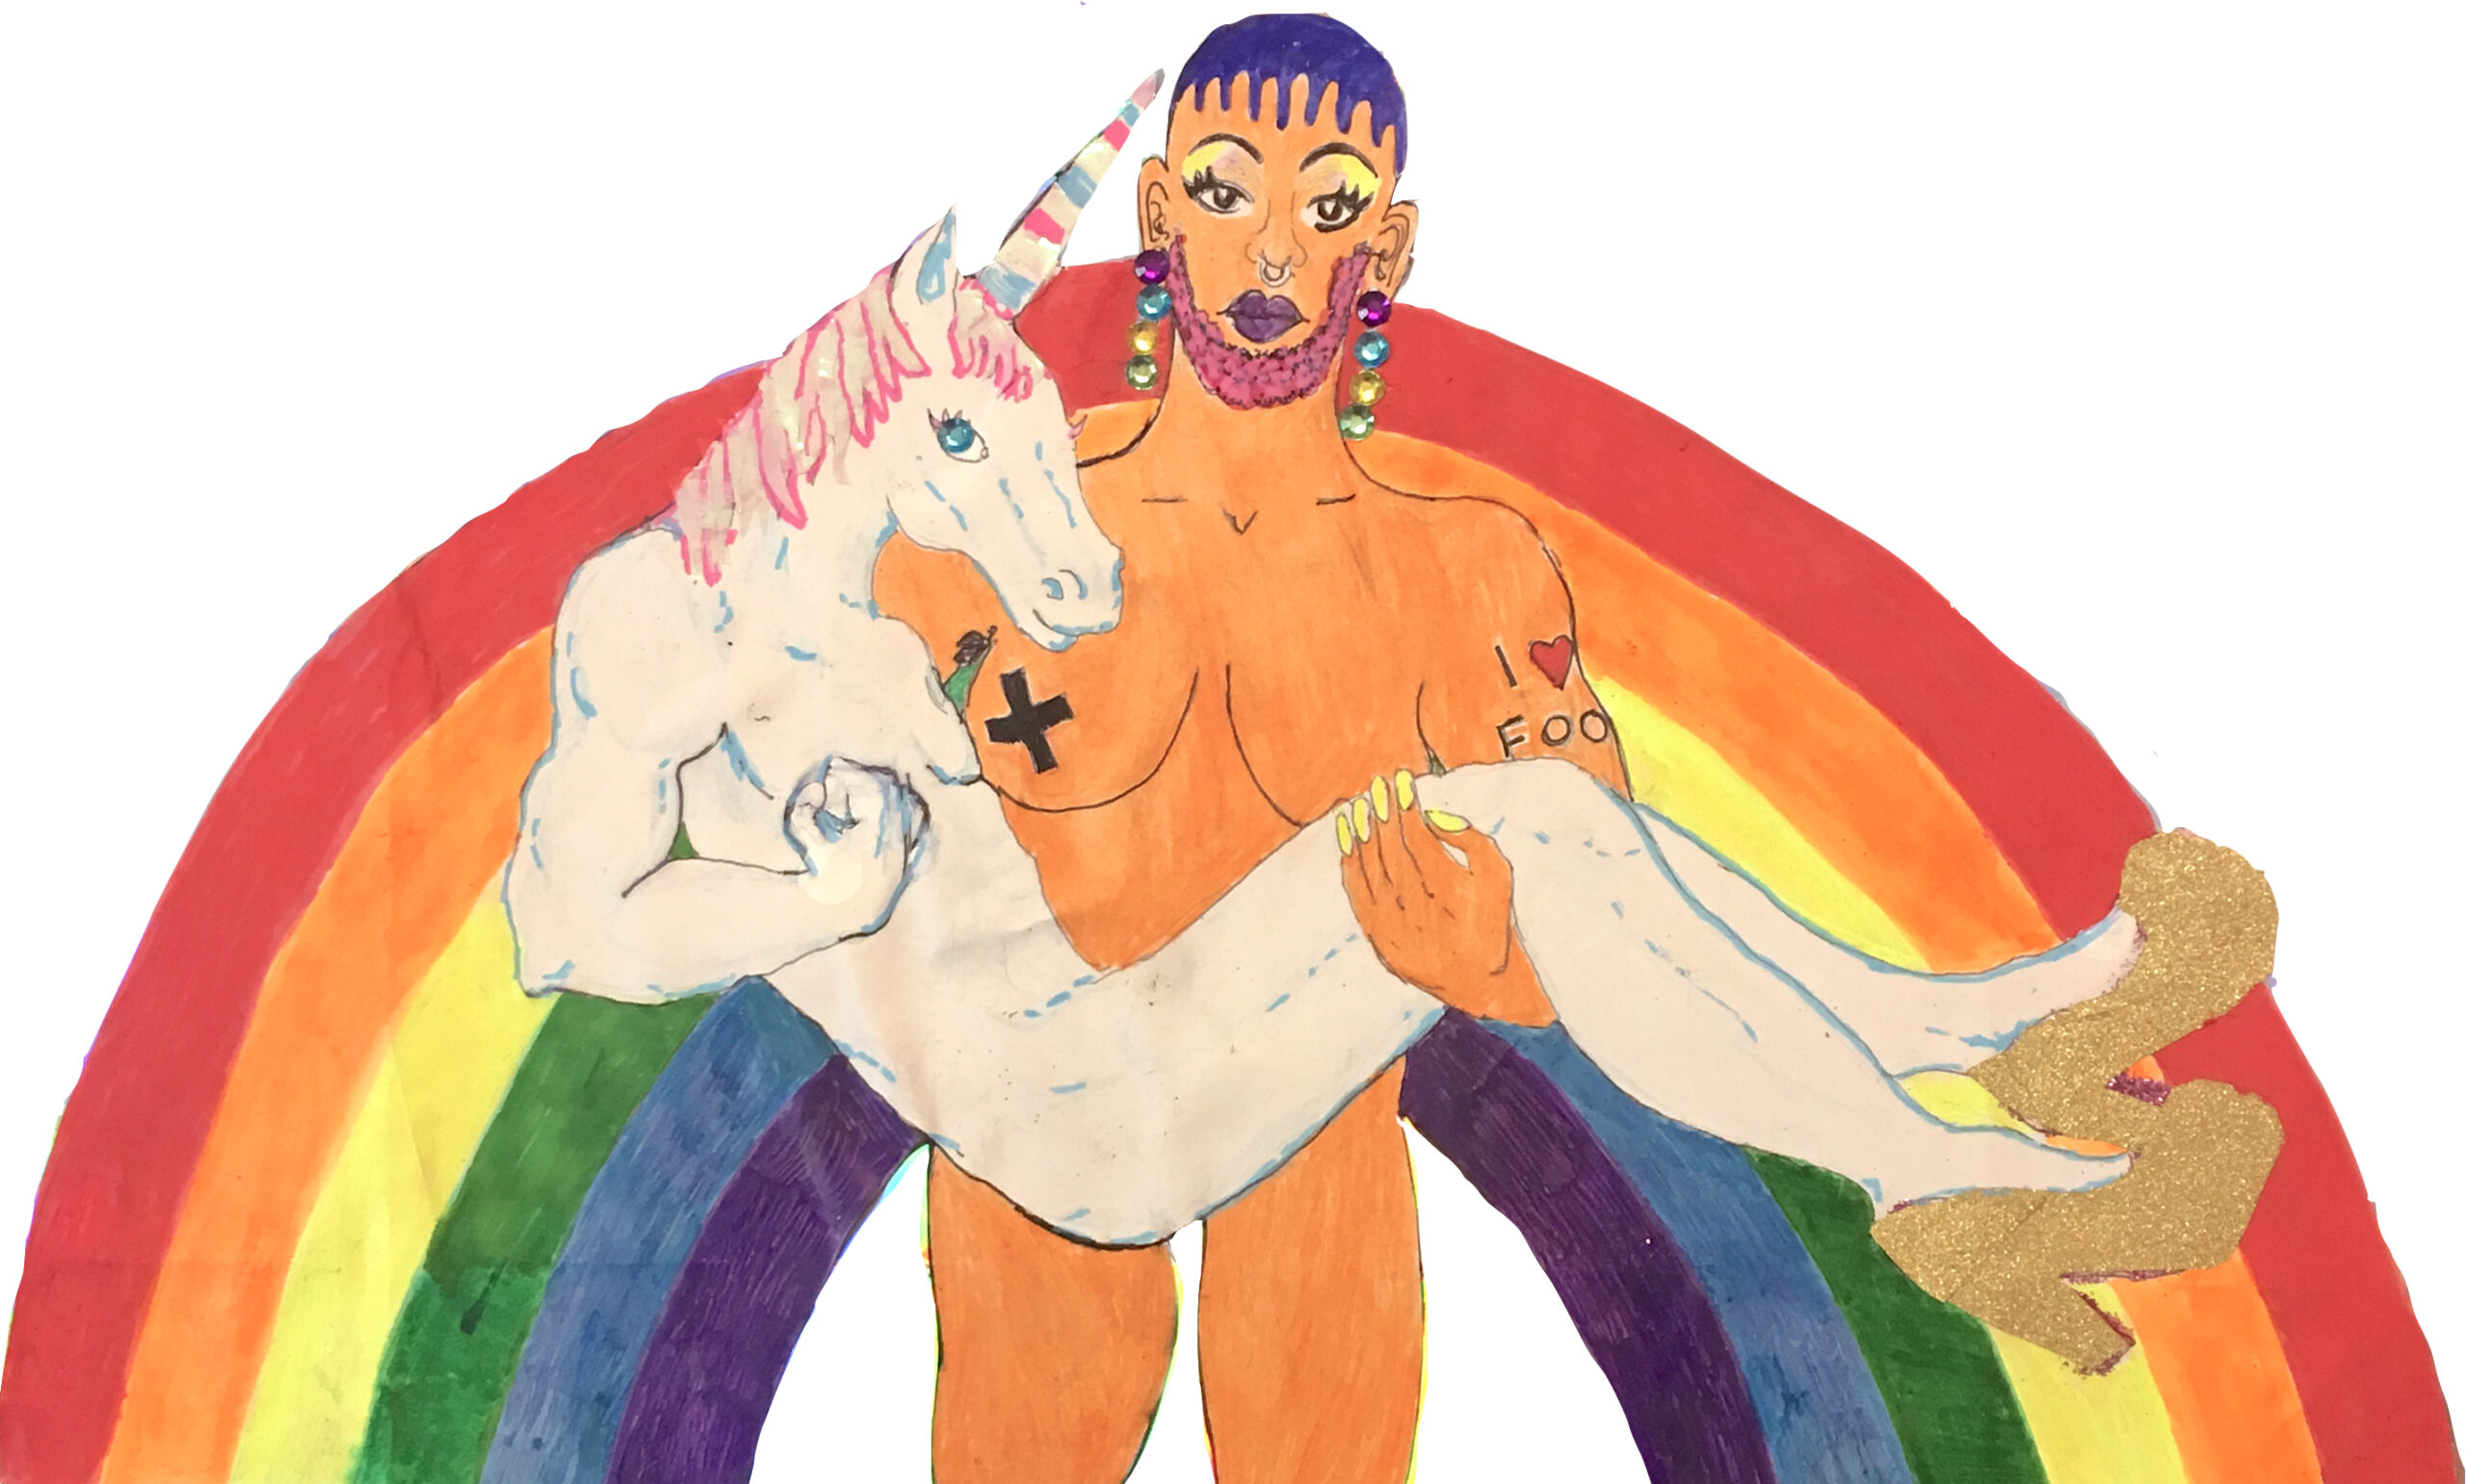 Texta drawing of a naked orange human carrying a white naked human with a unicorn head in front of a rainbow.